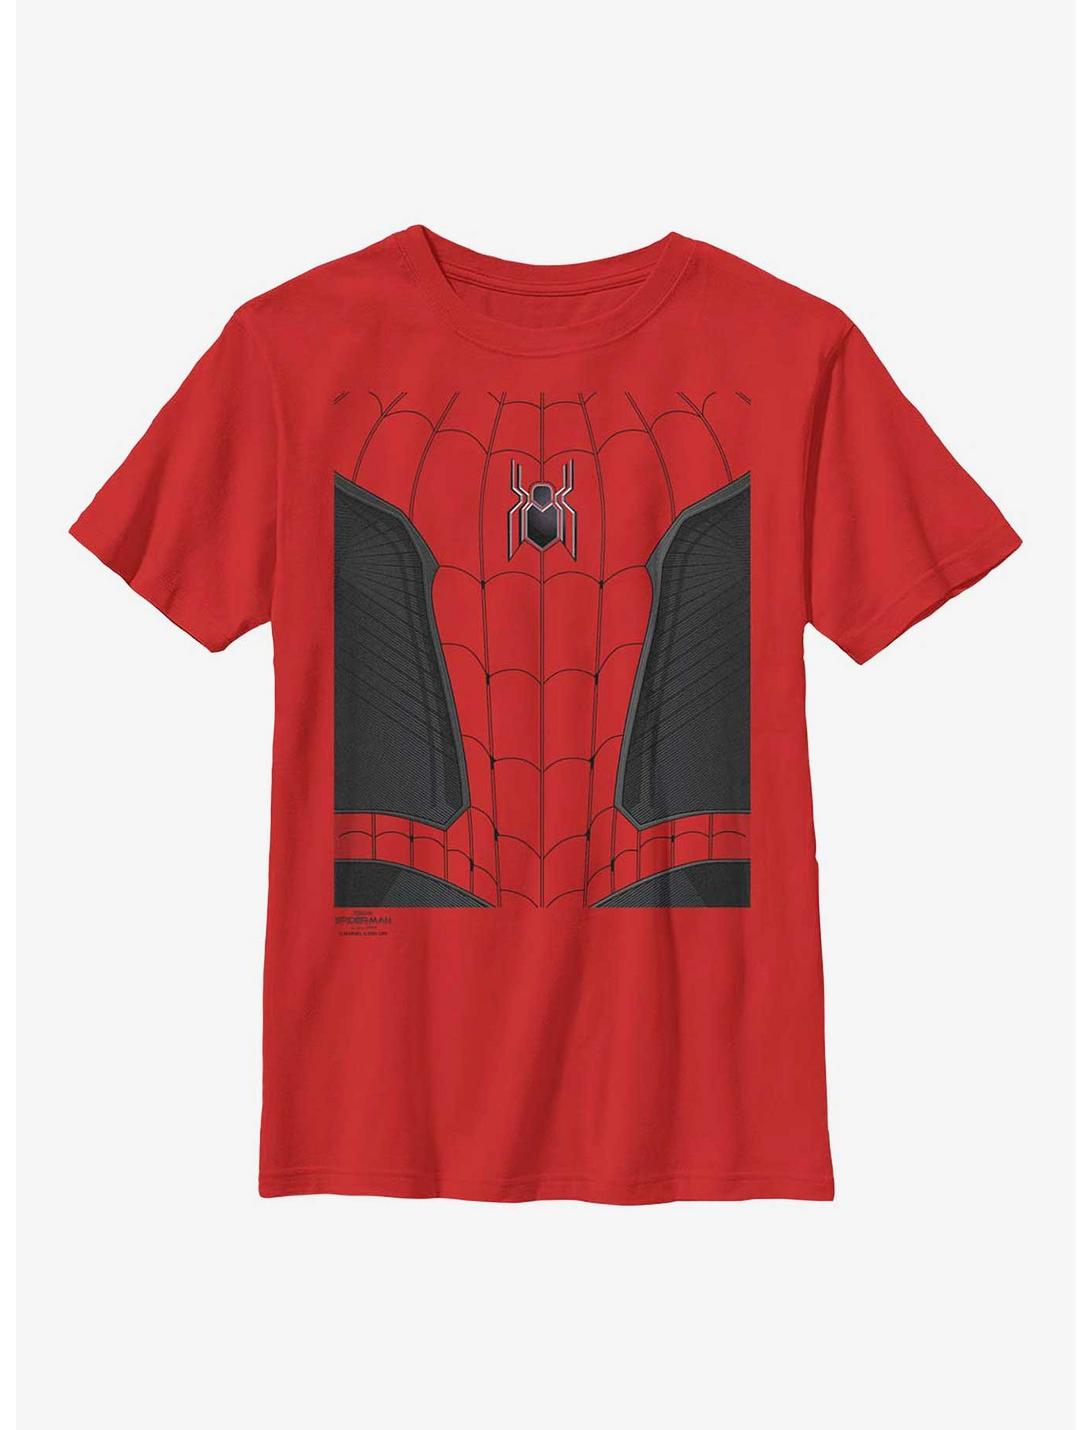 Marvel Spider-Man: No Way Home Spider-Man Costume Youth T-Shirt, RED, hi-res